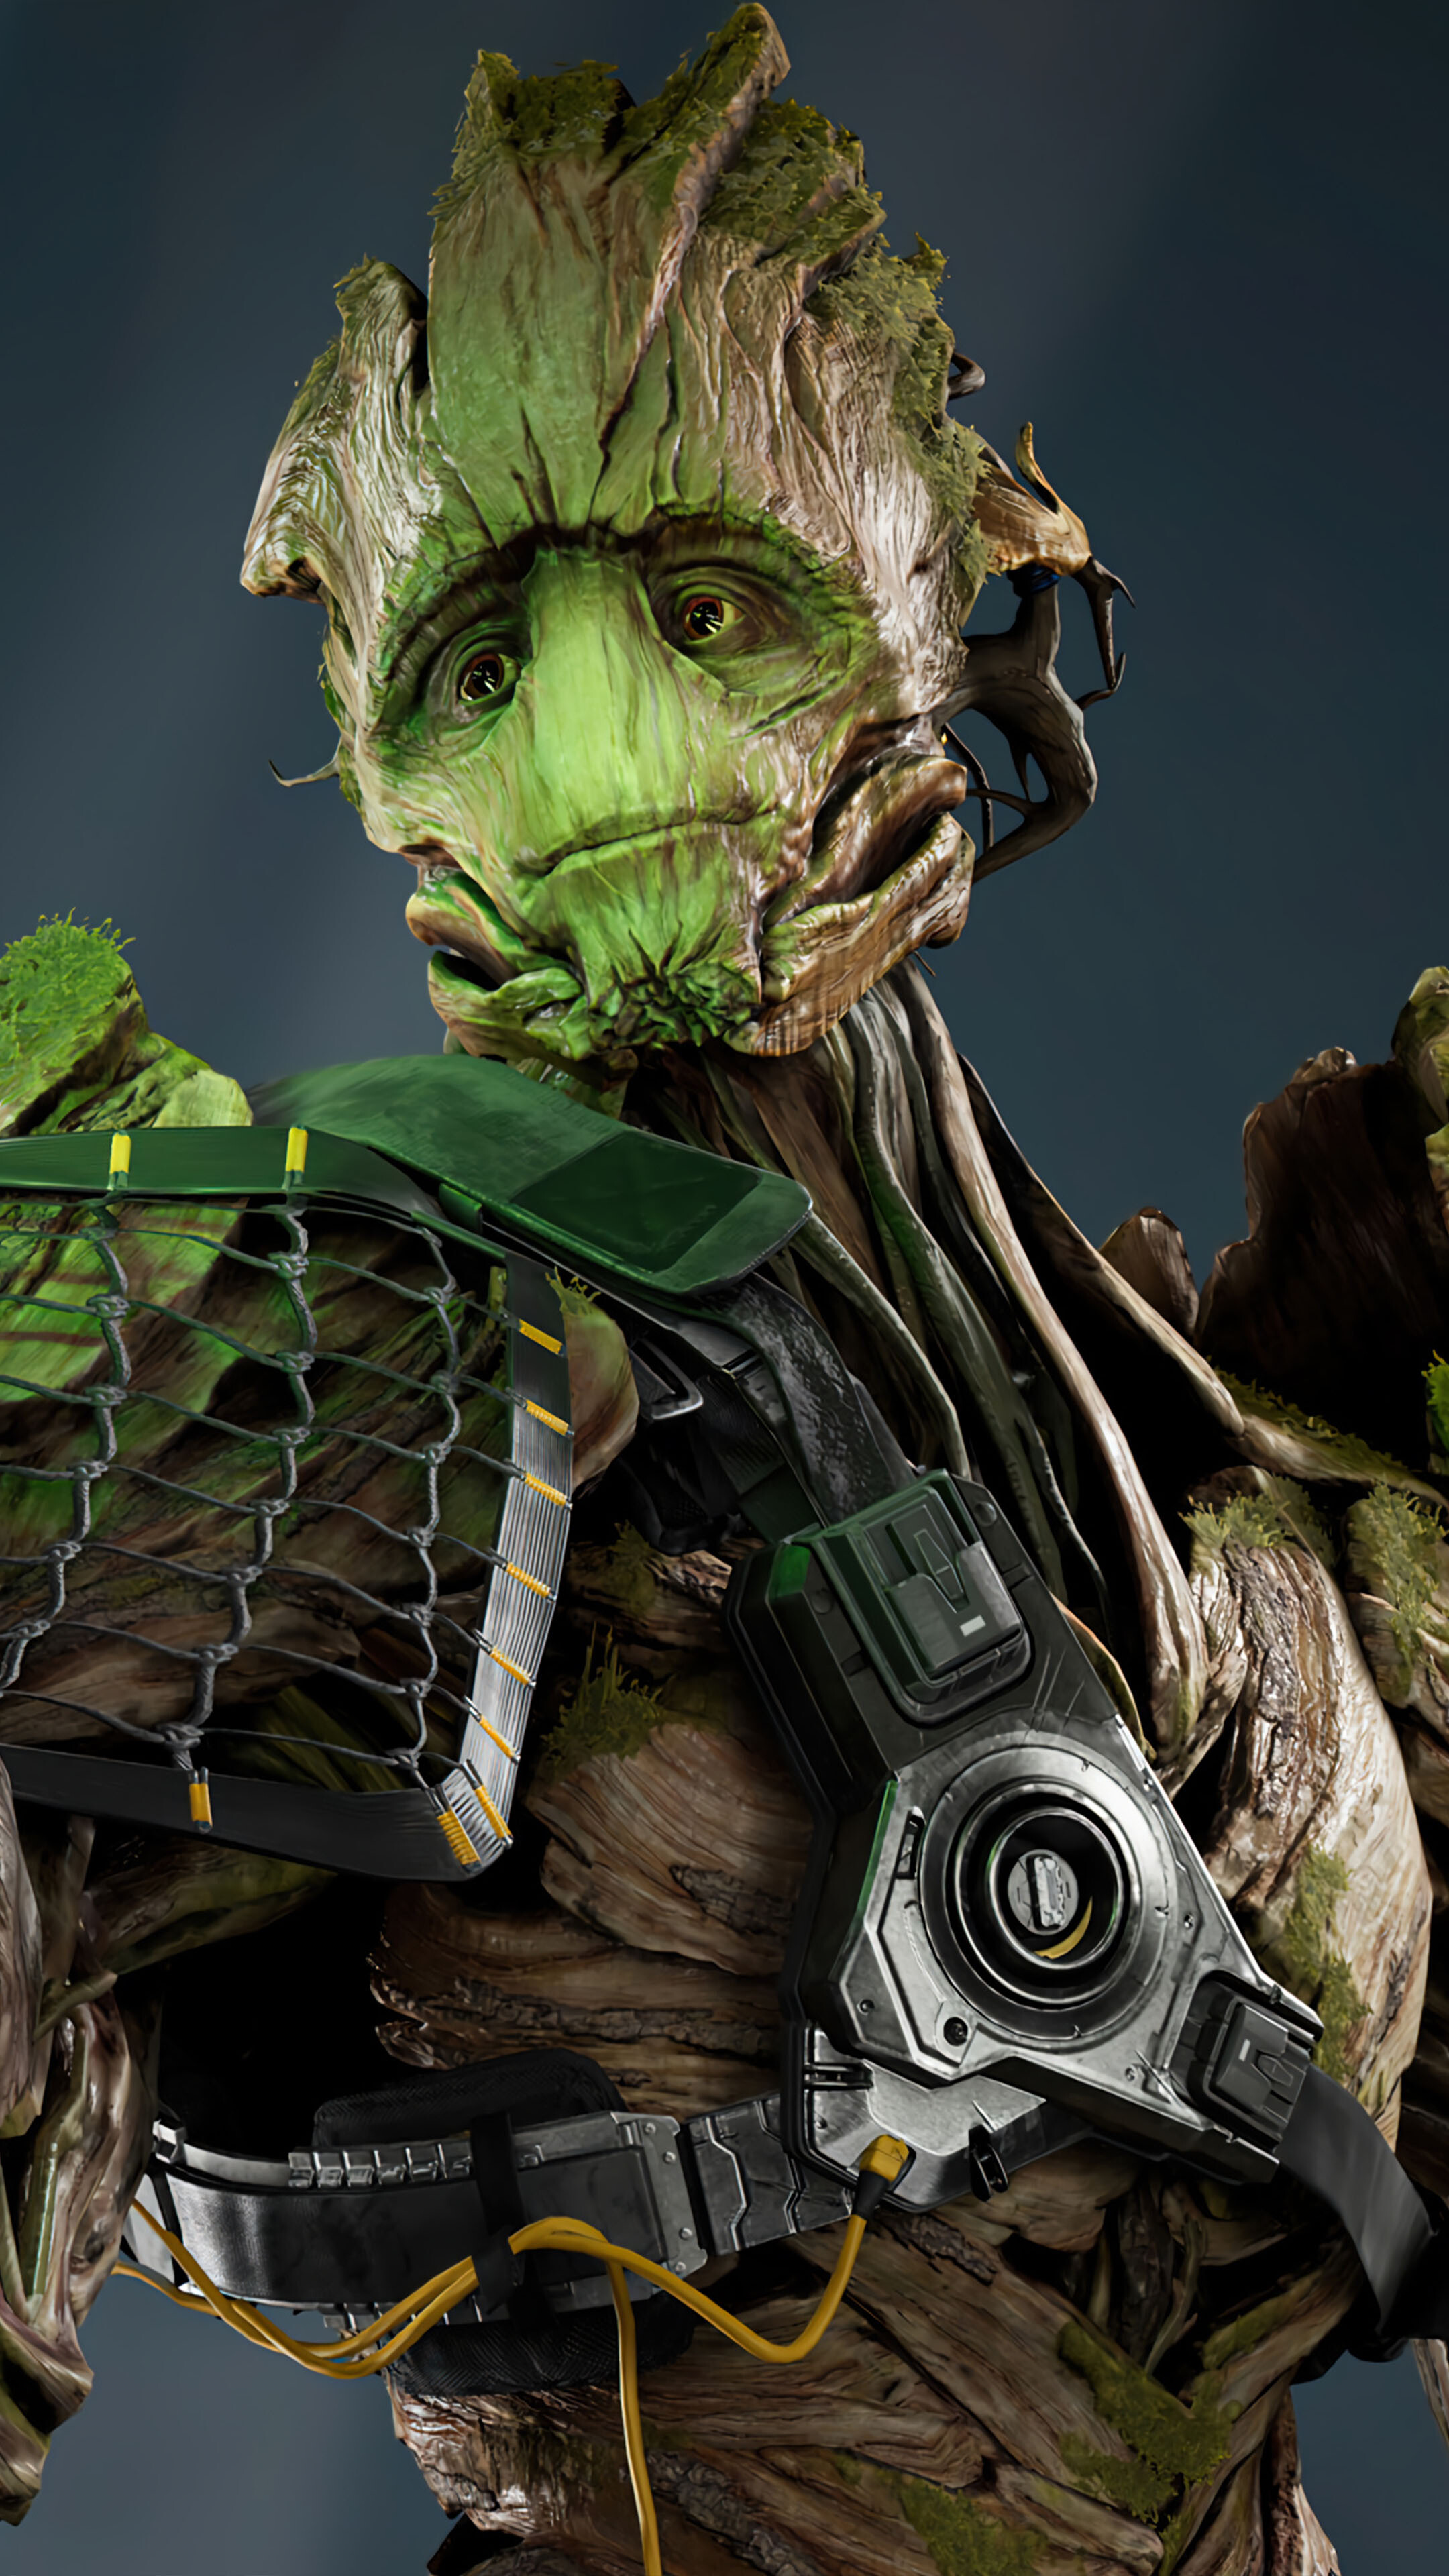 Marvel's Guardians of the Galaxy: Groot, Robert Montcalm, Rocket's loyal partner, and fellow former bounty hunter, who is the last of his species, Video game. 2160x3840 4K Wallpaper.